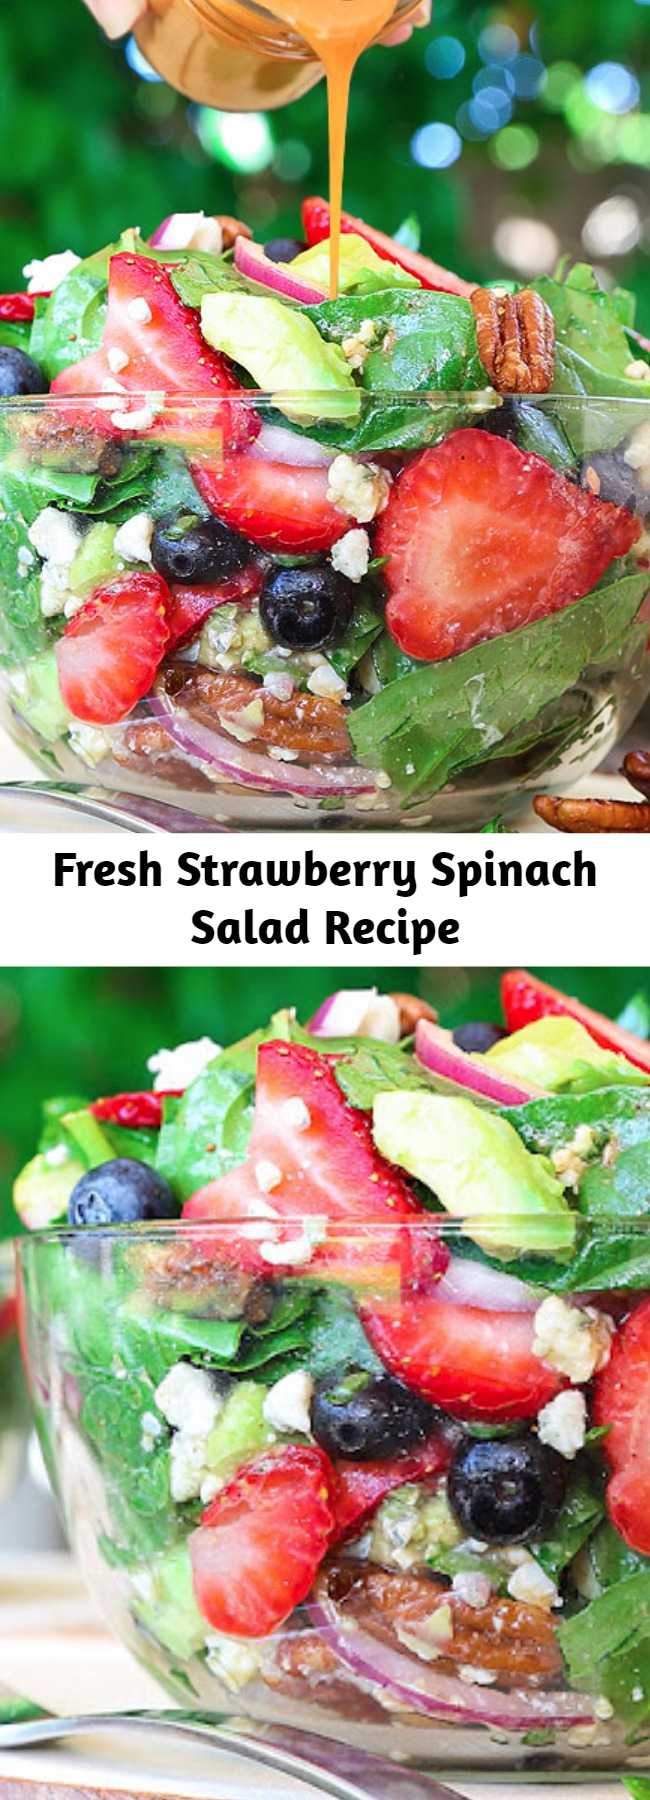 Fresh Strawberry Spinach Salad Recipe - Best Ever Strawberry Spinach Salad will rock your world! This simple recipe is a celebration of summers bounty in the most spectacular salad you will ever eat. Fresh crisp spinach salad is taken to another level with bursts of sweetness from fresh summer fruit and buttery avocado. It is tossed in a sweet and tangy vinaigrette and topped with crunchy nuts and creamy cheese. #salad #strawberry